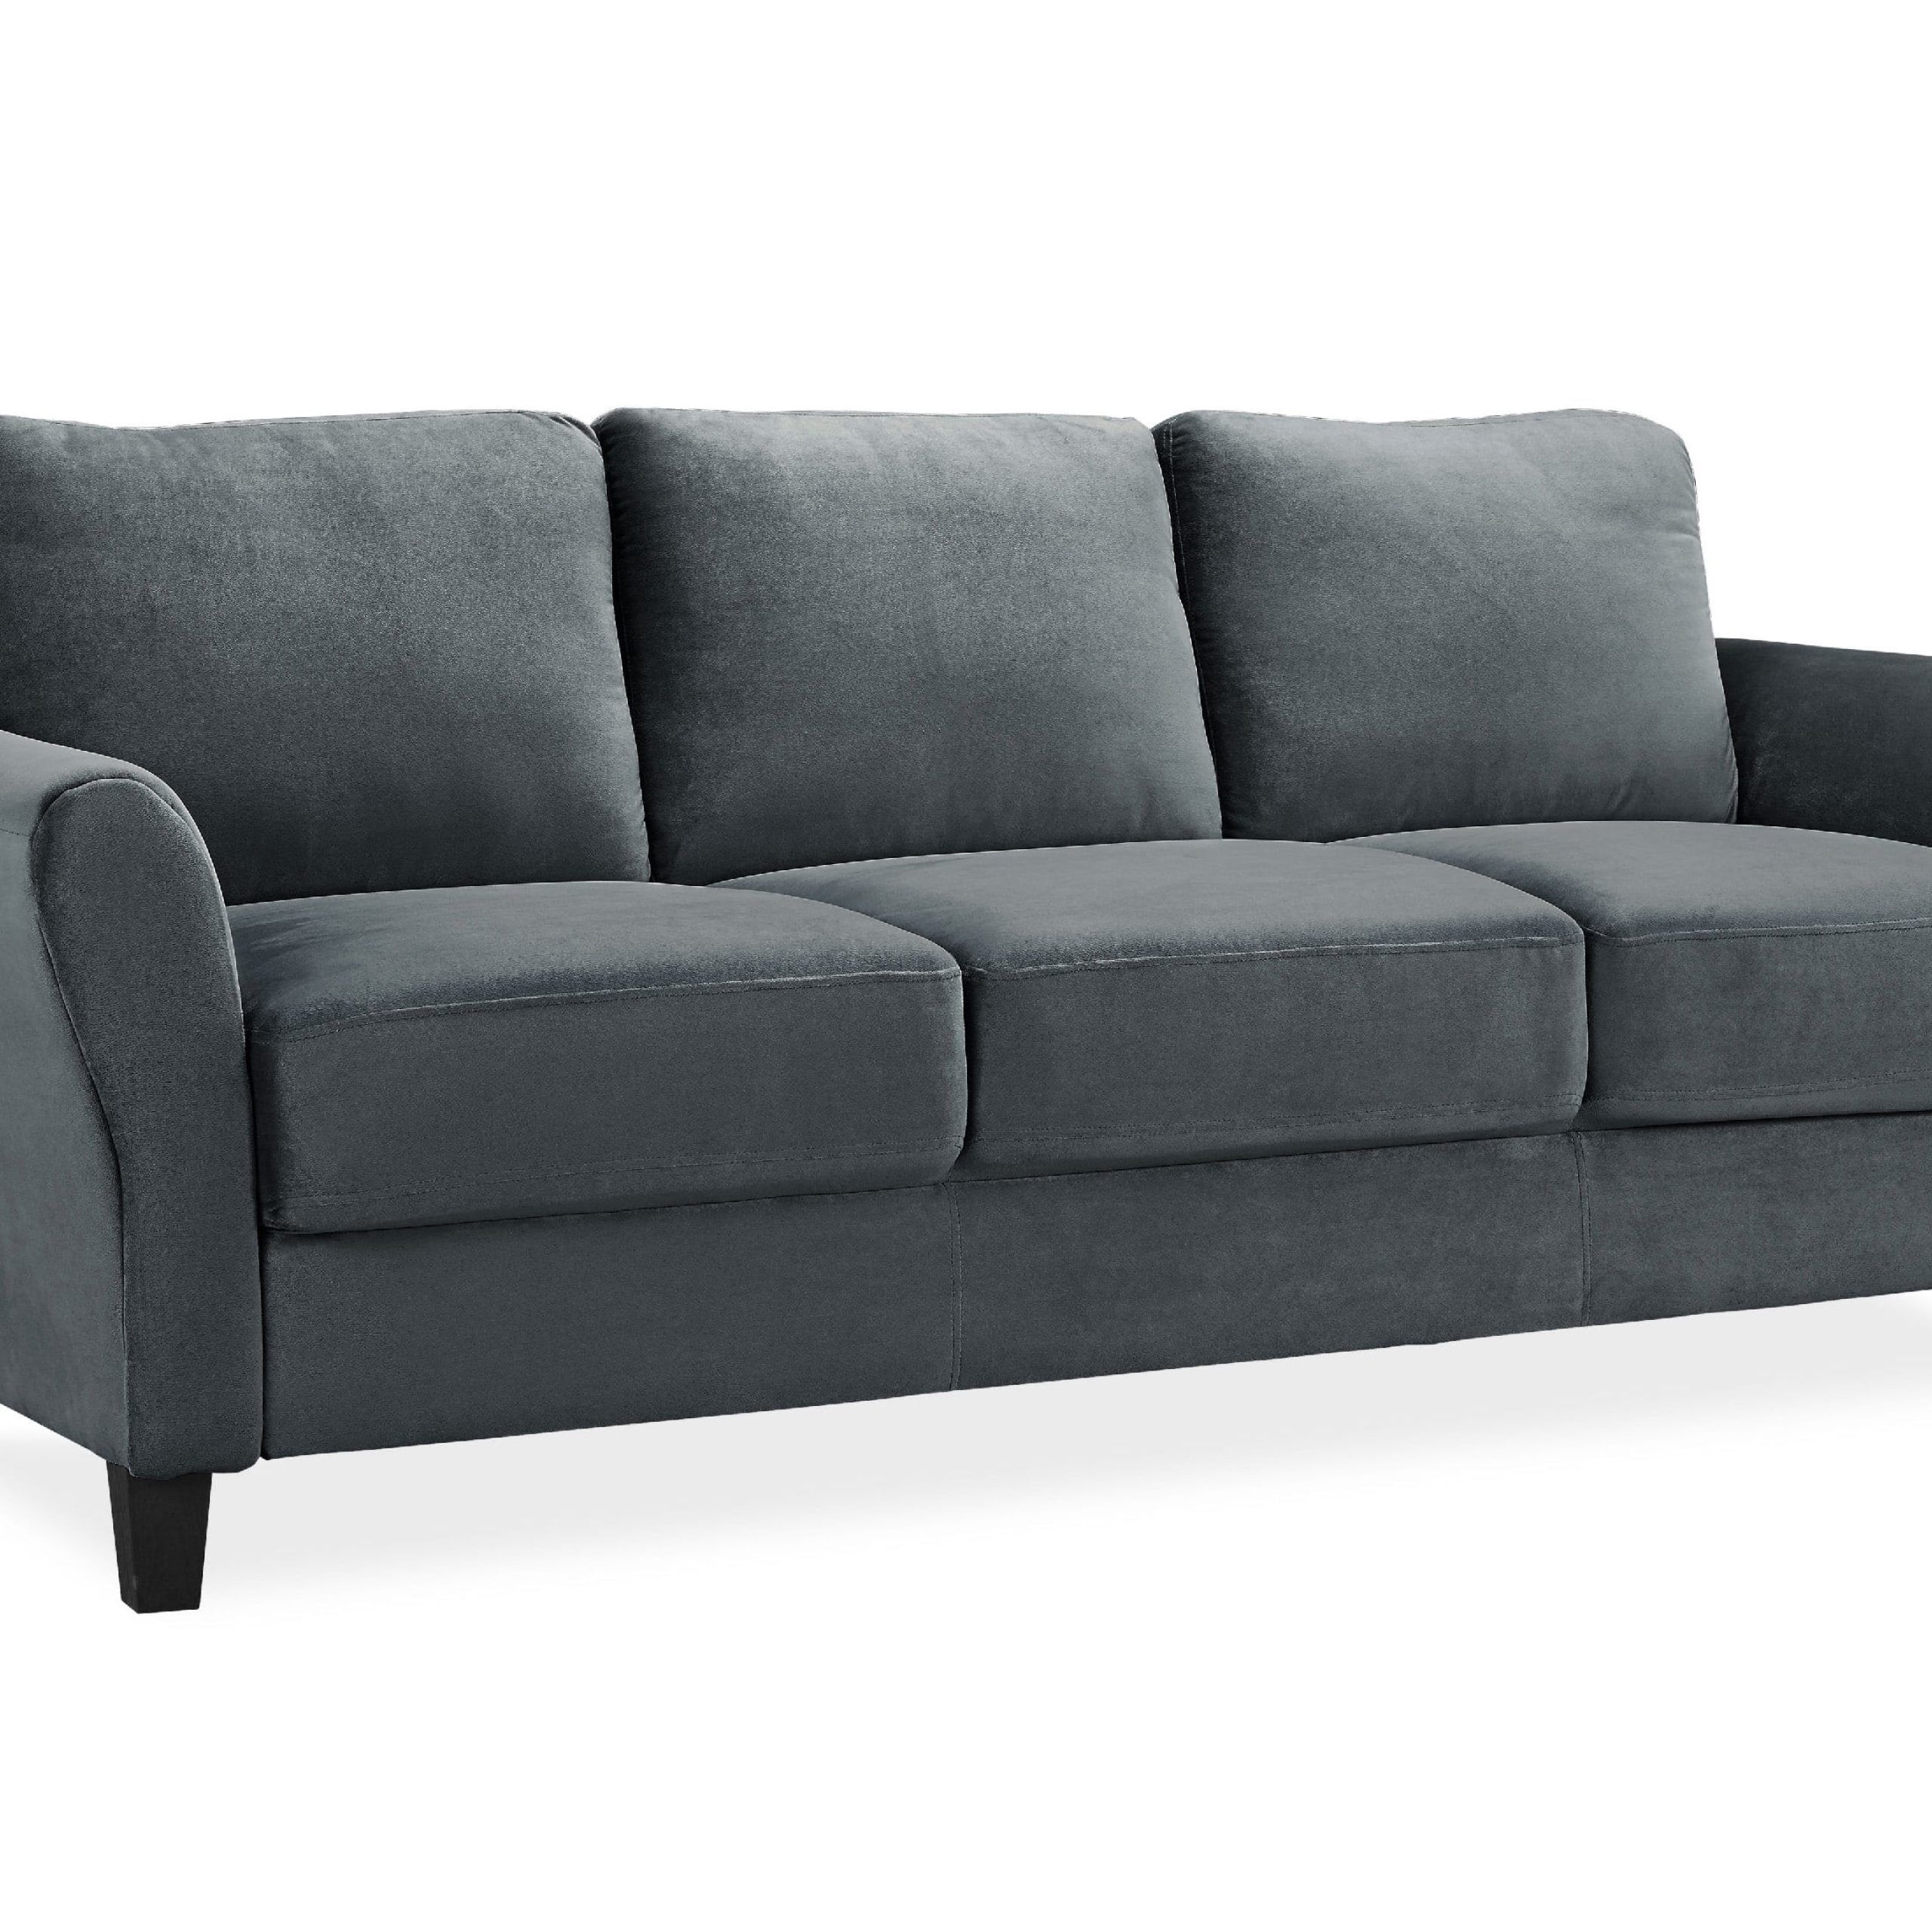 Lifestyle Solutions Alexa Sofa With Curved Arms, Gray Fabric – Walmart Intended For Sofas With Curved Arms (Photo 7 of 15)